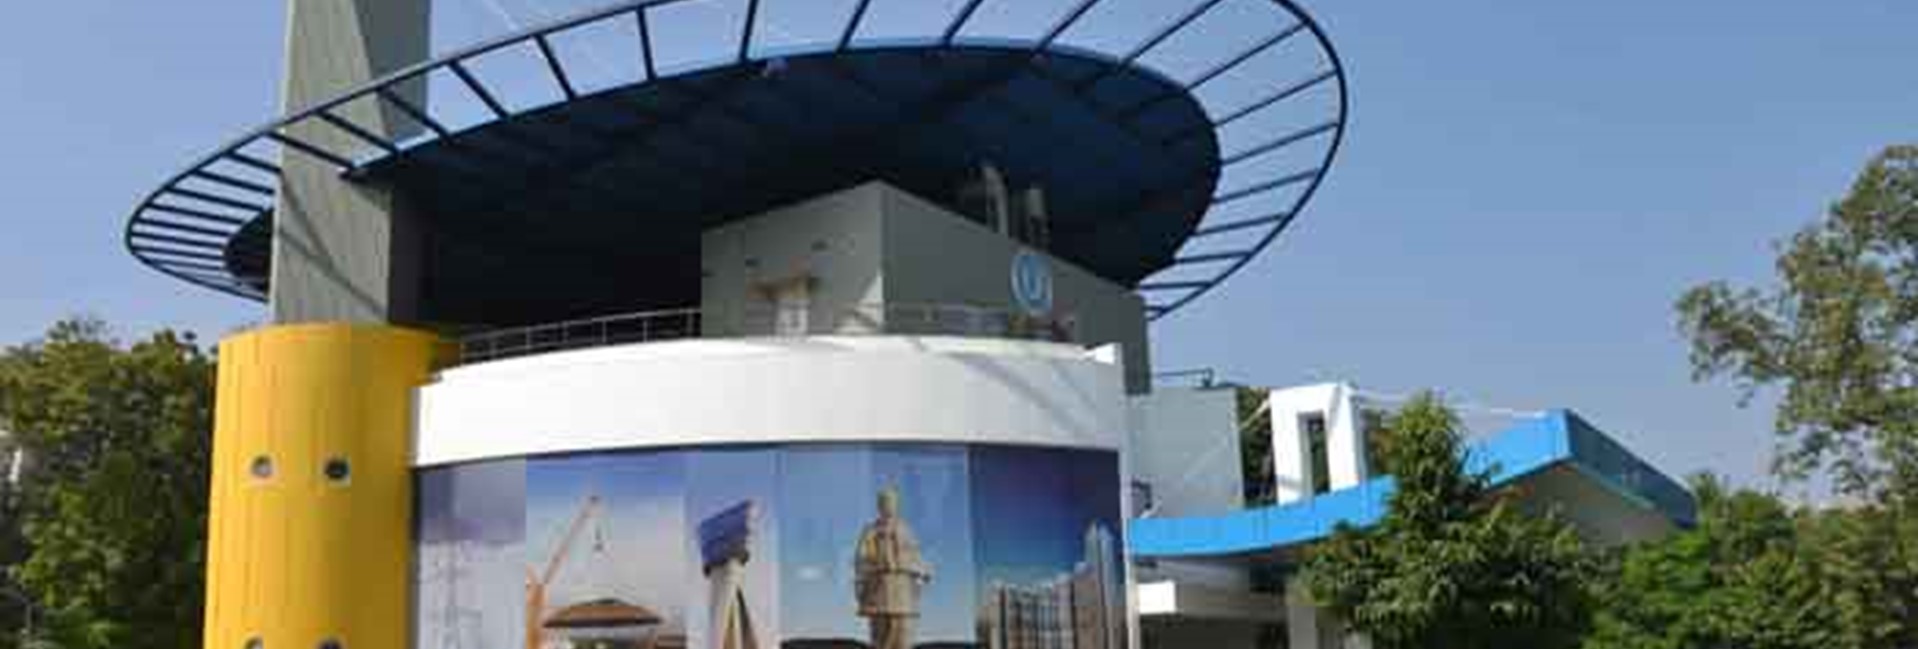 Digitally Transformed Museum in India- L&T Construction